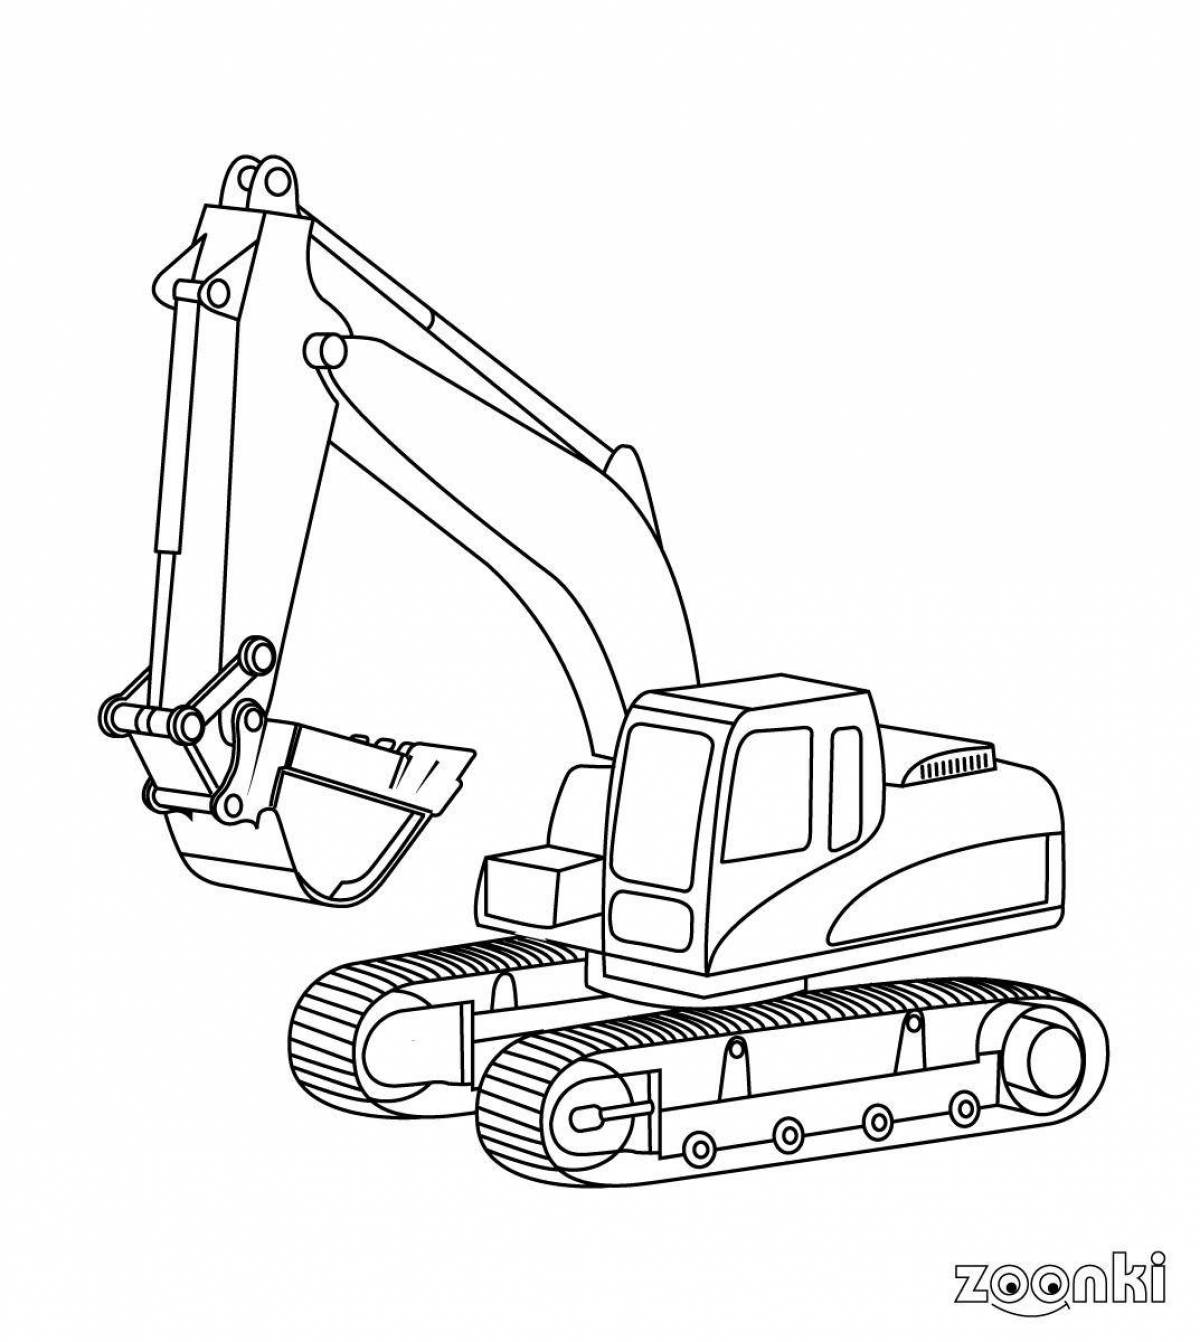 Colored excavator for kids